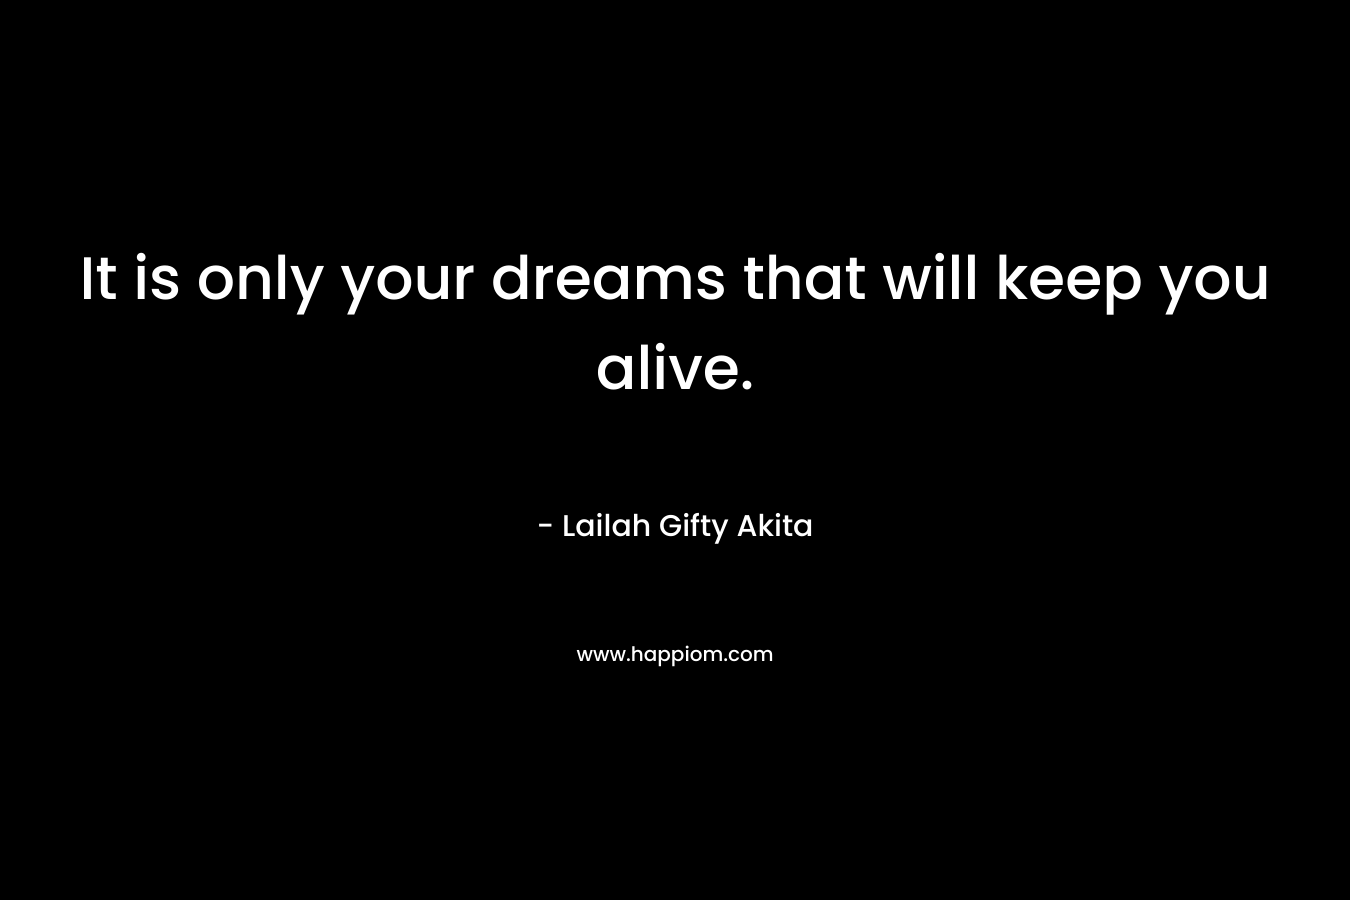 It is only your dreams that will keep you alive.